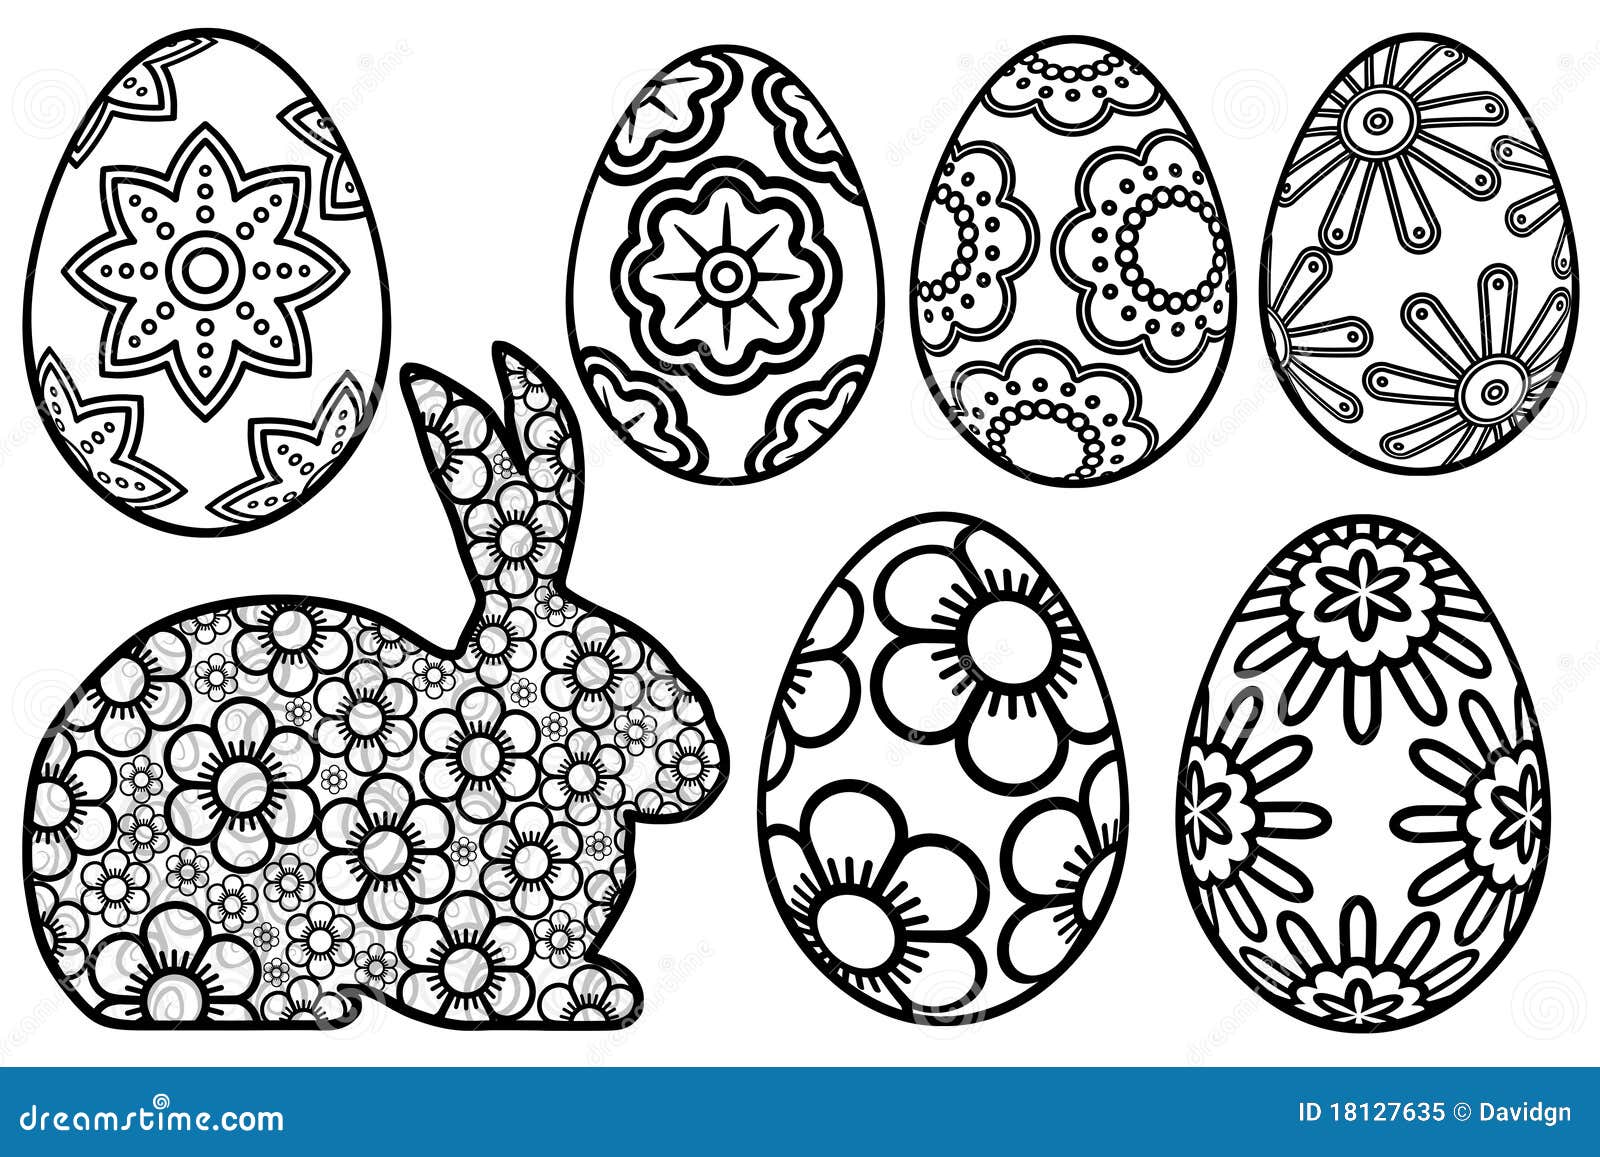 FREE Easter Bunny Drawings  Cute Easter bunnies to print and colour in